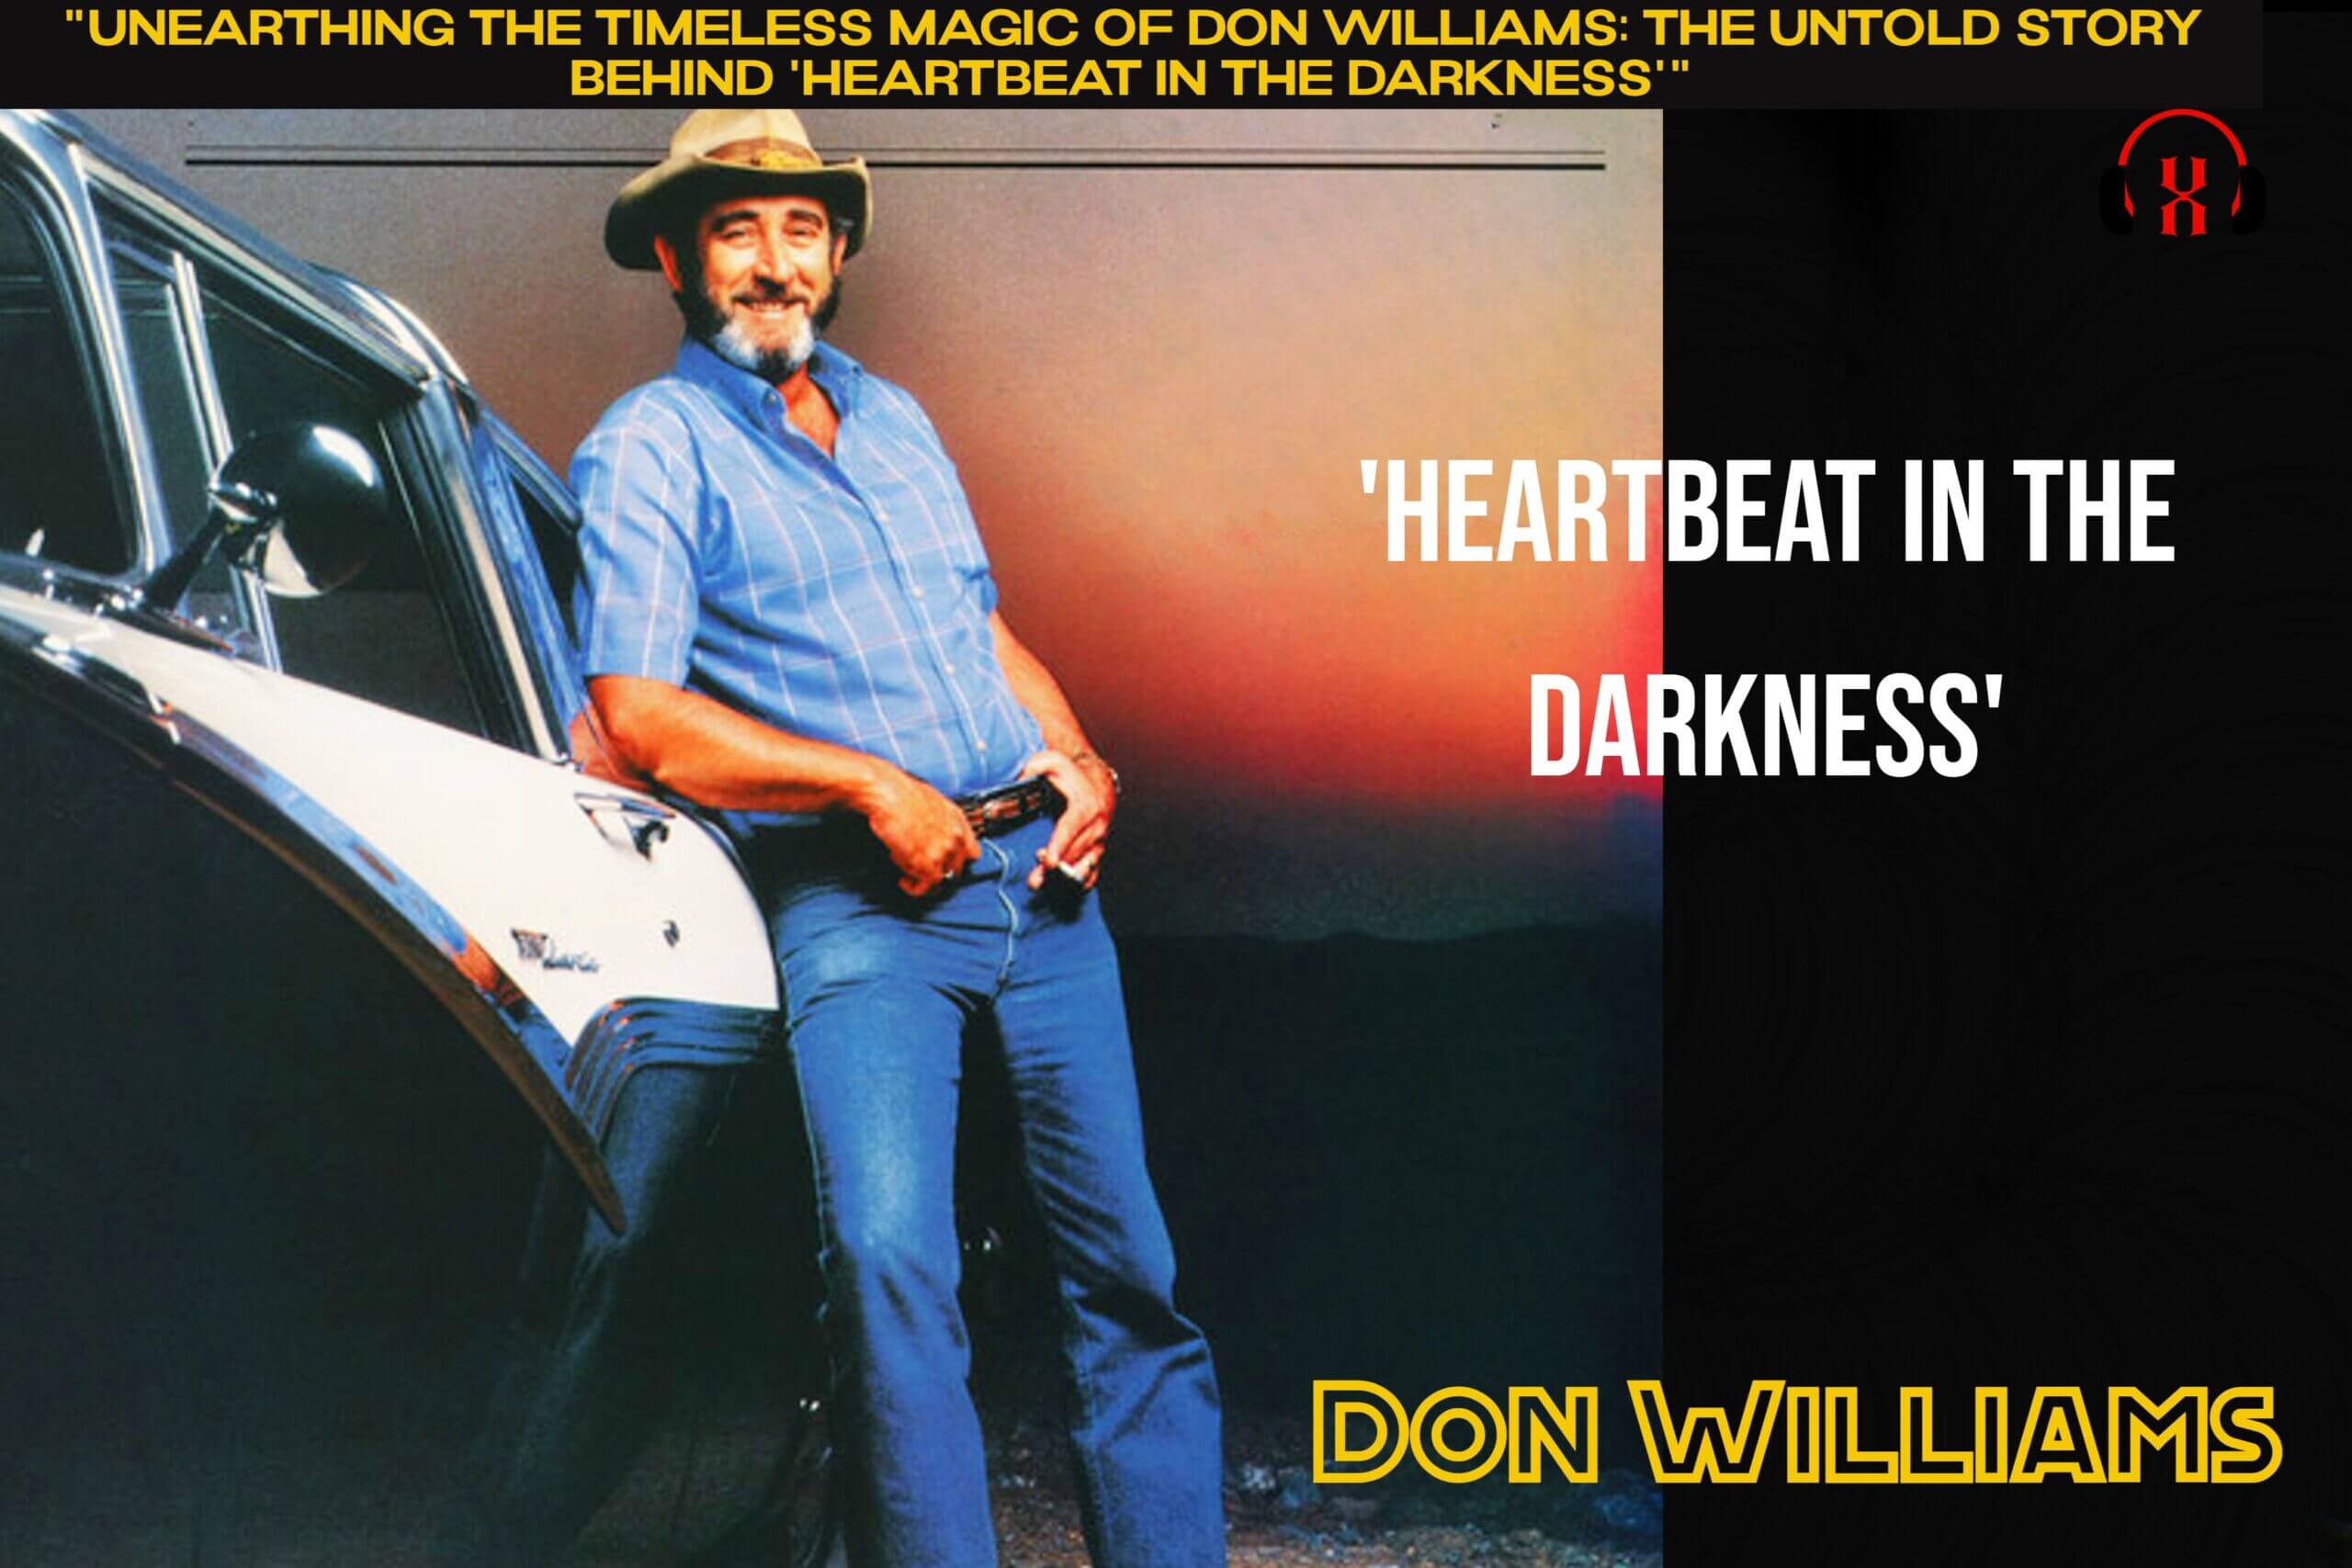 Don Williams: The Untold Story Behind 'Heartbeat In The Darkness'"